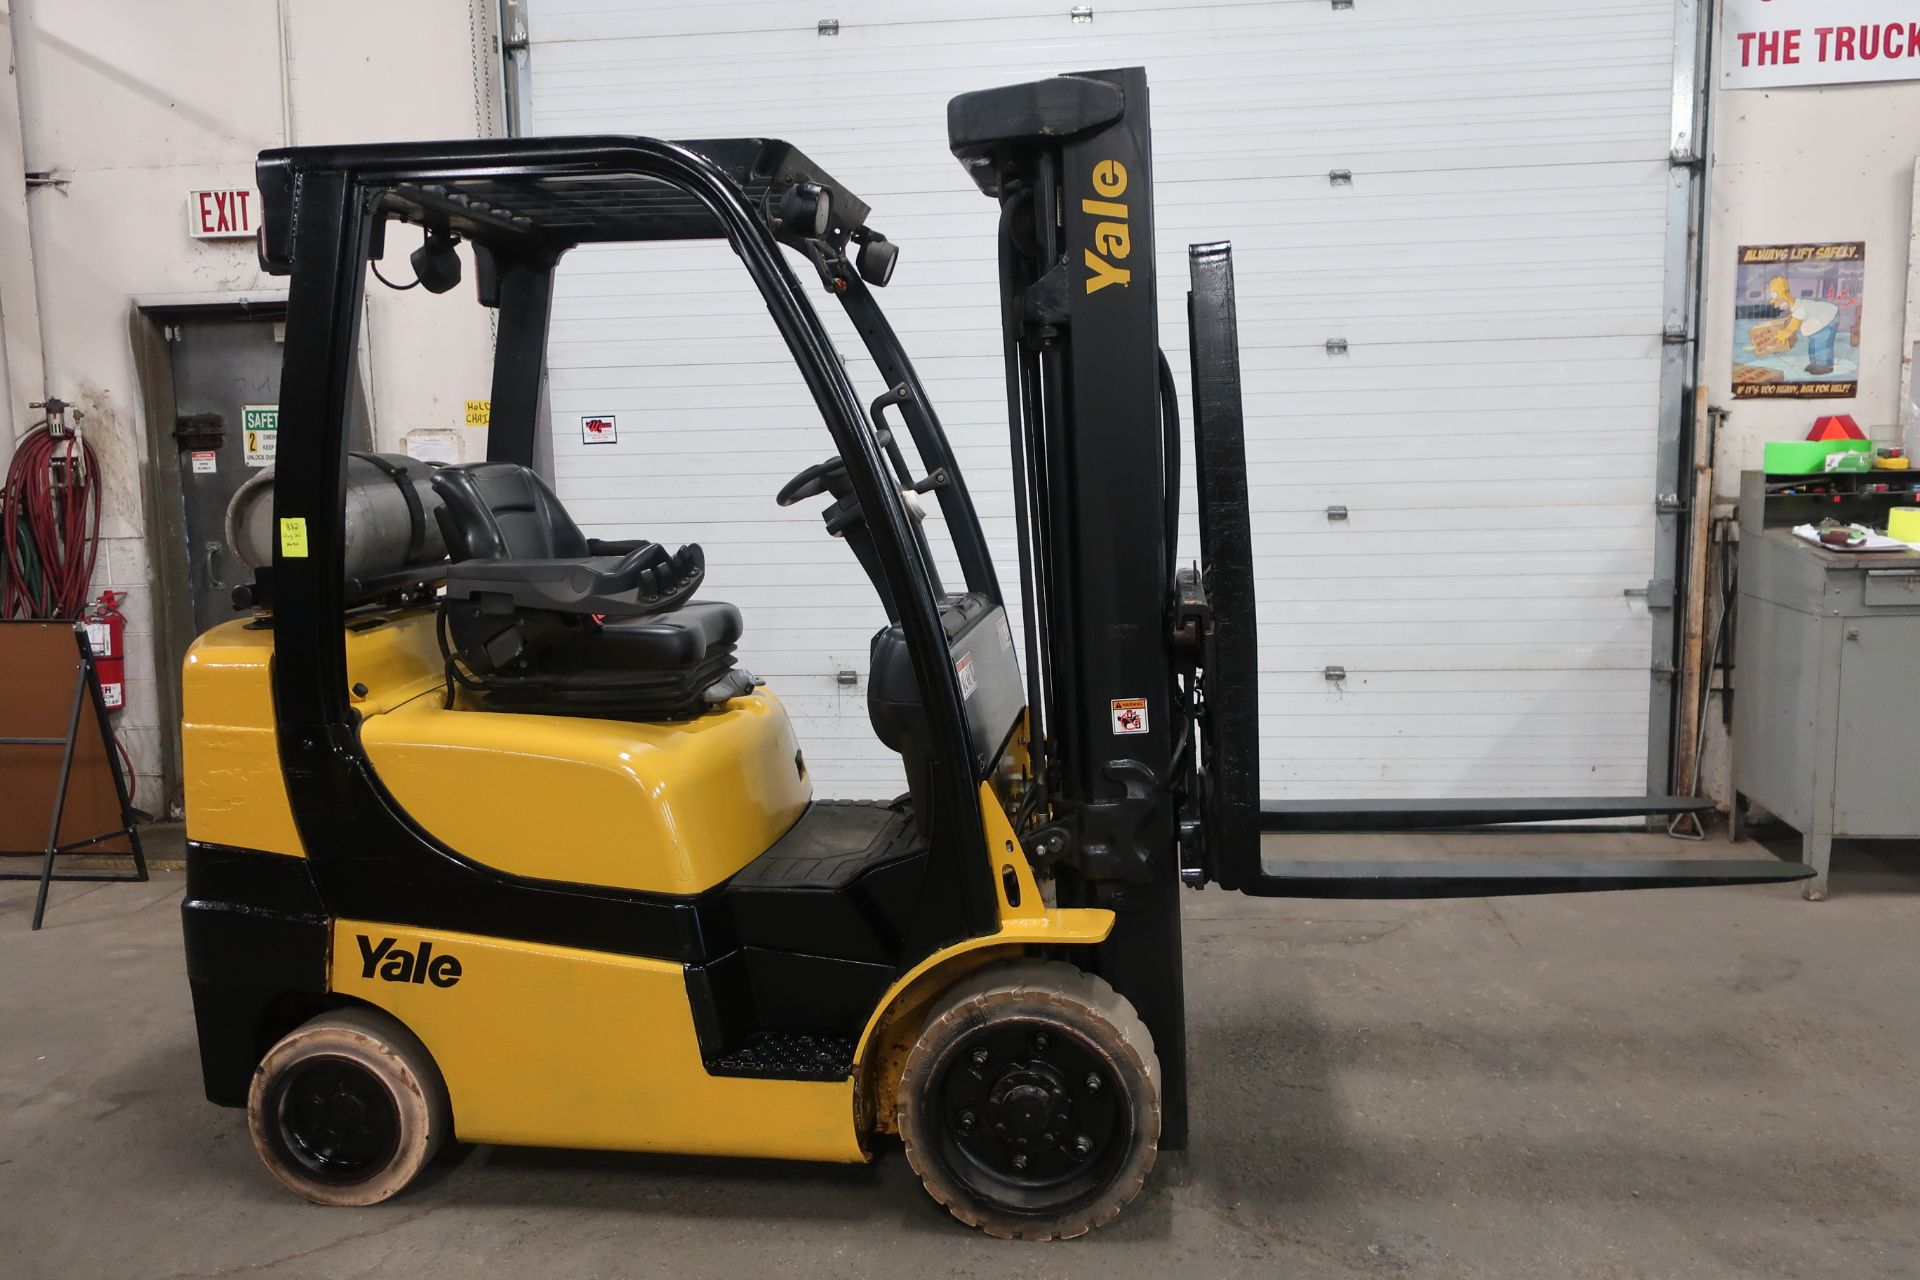 FREE CUSTOMS - 2015 Yale 6000lbs Capacity Forklift with 3-stage mast - LPG (propane) with